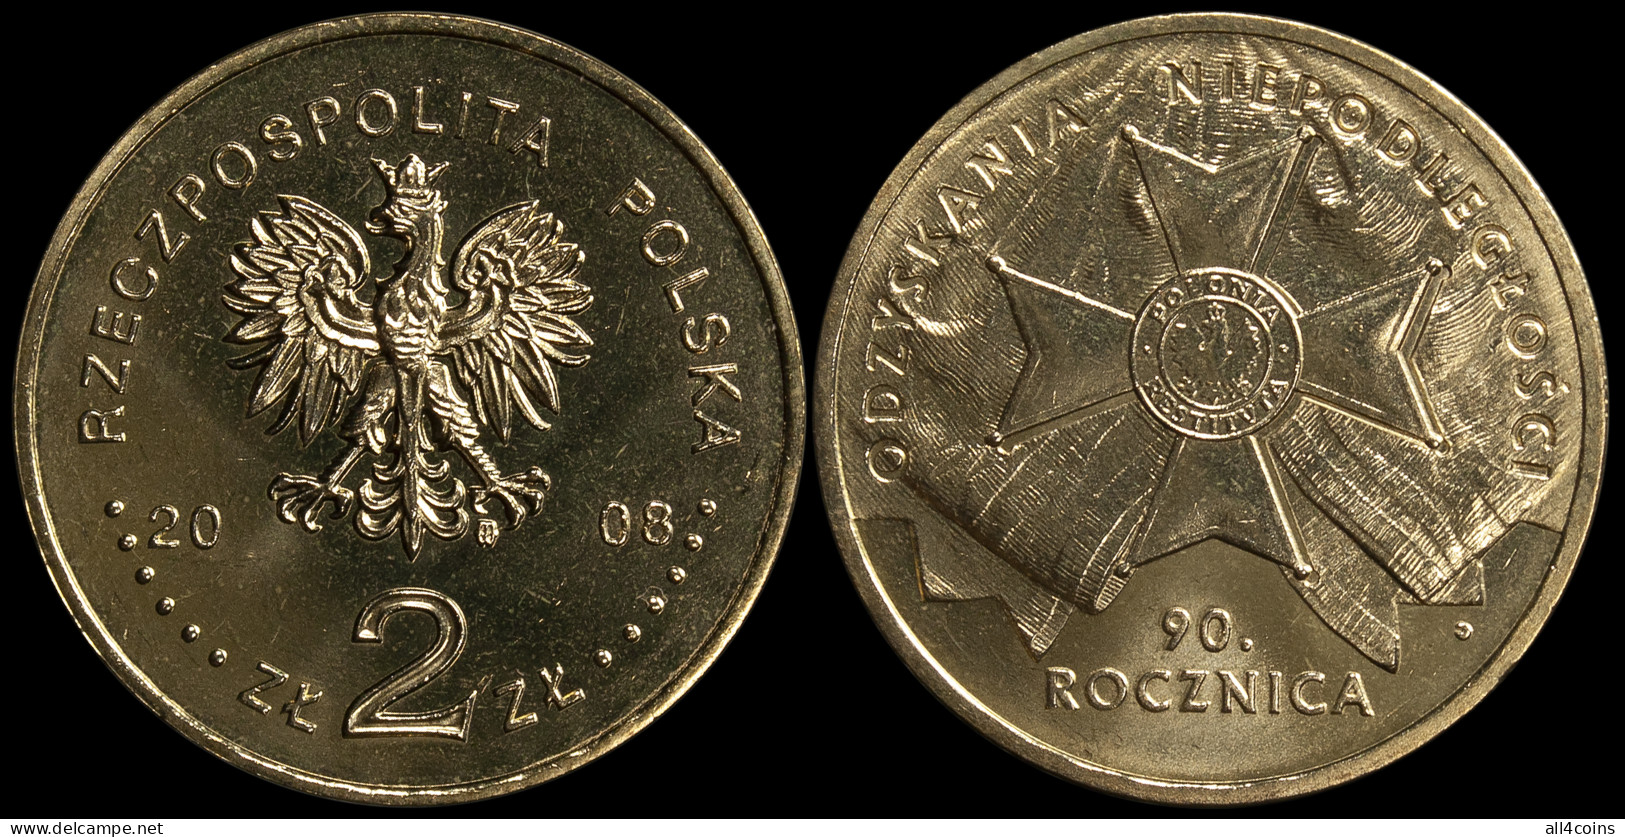 Poland. 2 Zloty. 2008 (Coin KM#Y.650. Unc) Regaining Independence - Poland